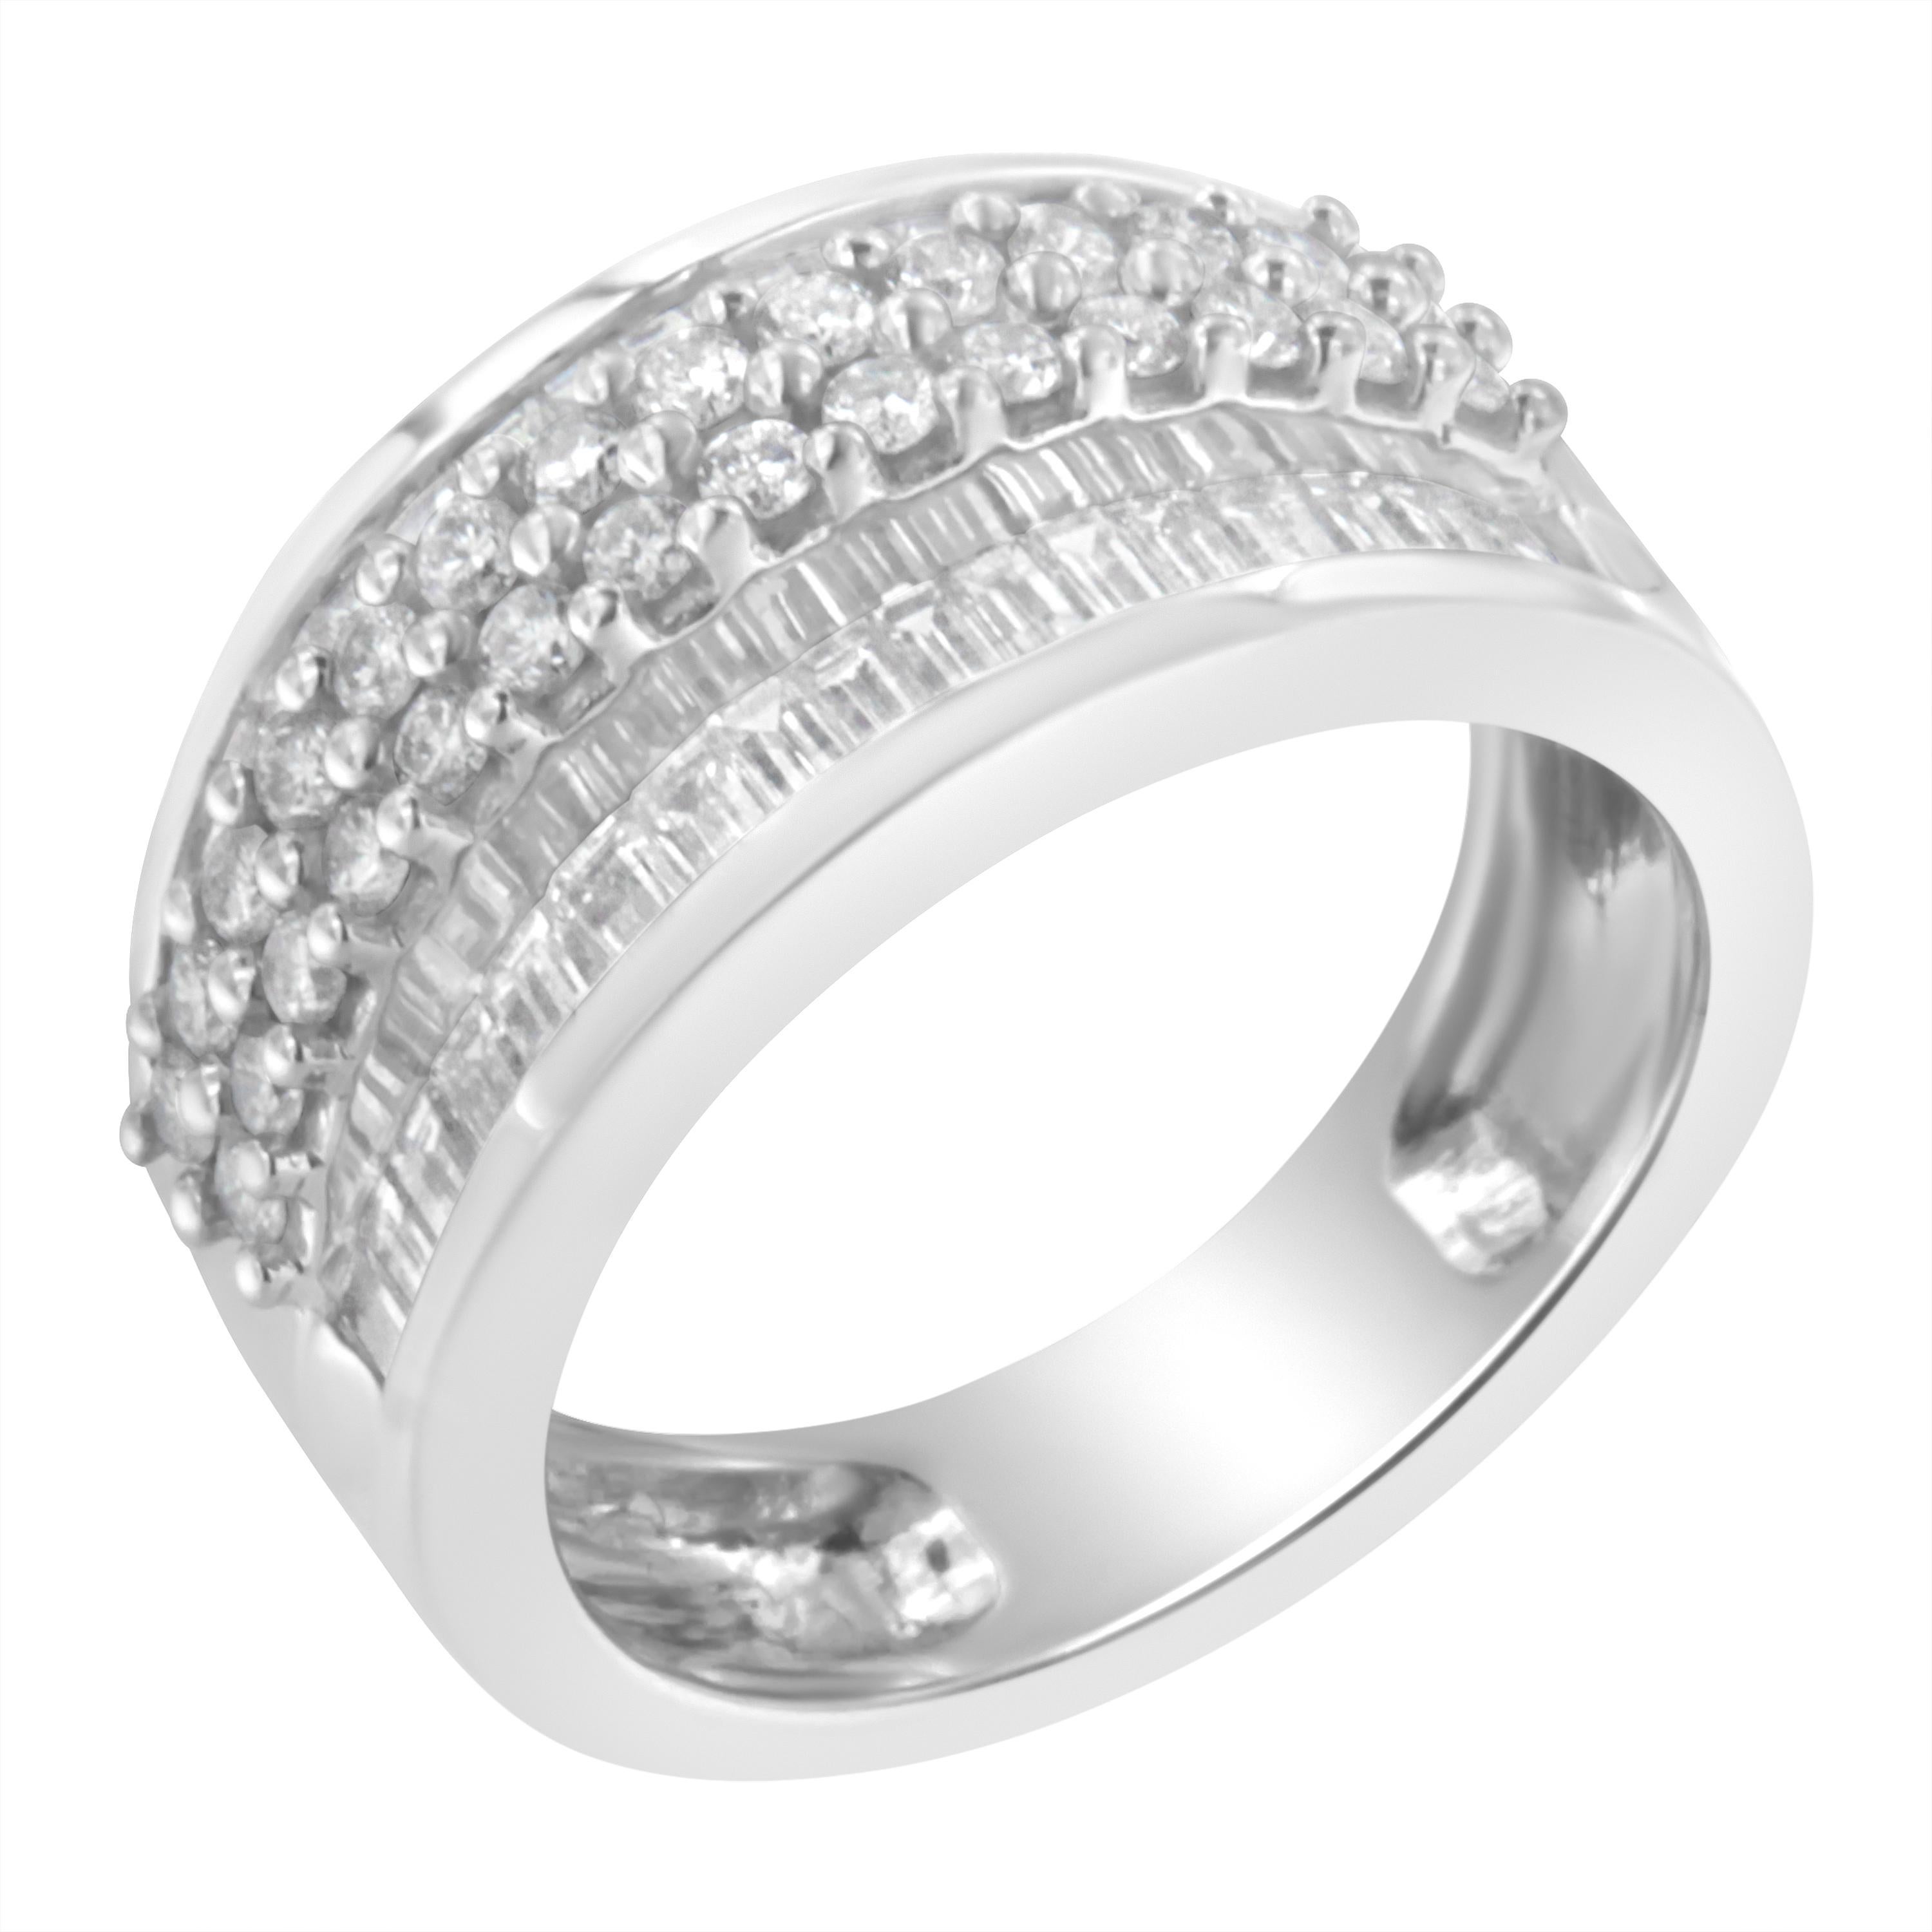 Chic 14K white gold diamond ring with a timeless design. The natural diamonds are round- and baguette-cut and beautifully mounted in a channel setting. This gorgeous ring works just as well as a promise ring as a timeless fashion piece which is sure